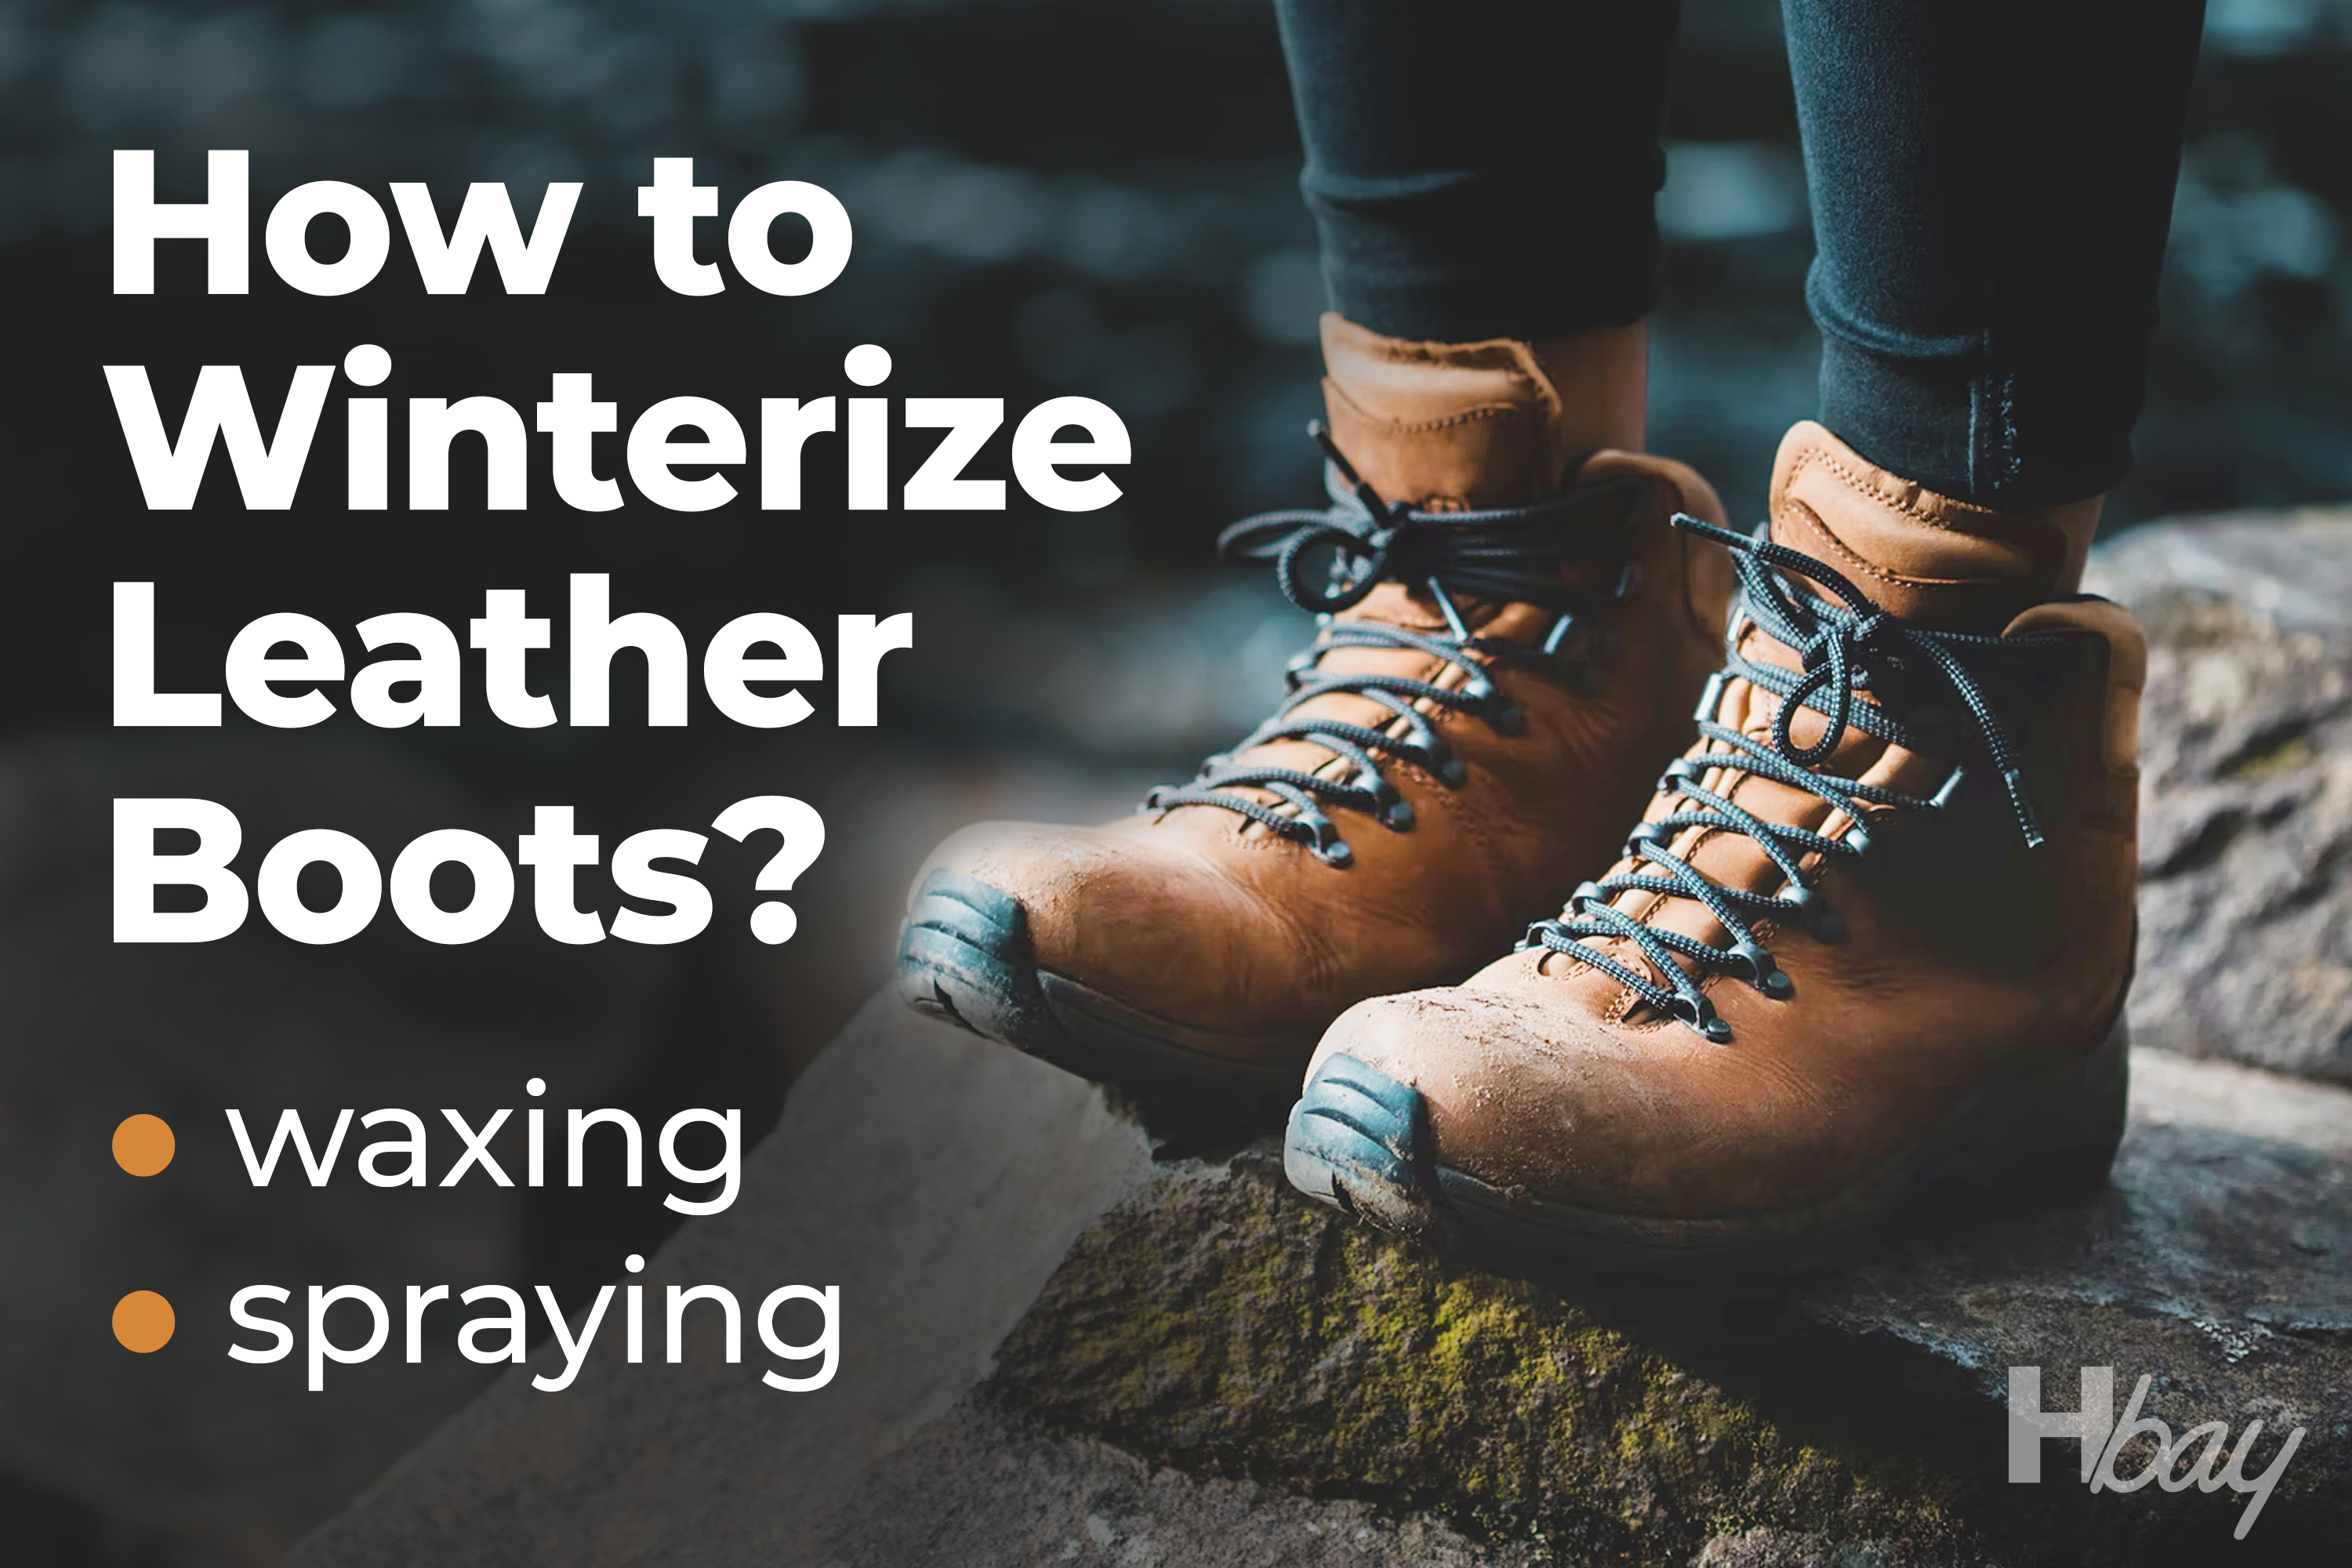 How to Winterize Leather Boots